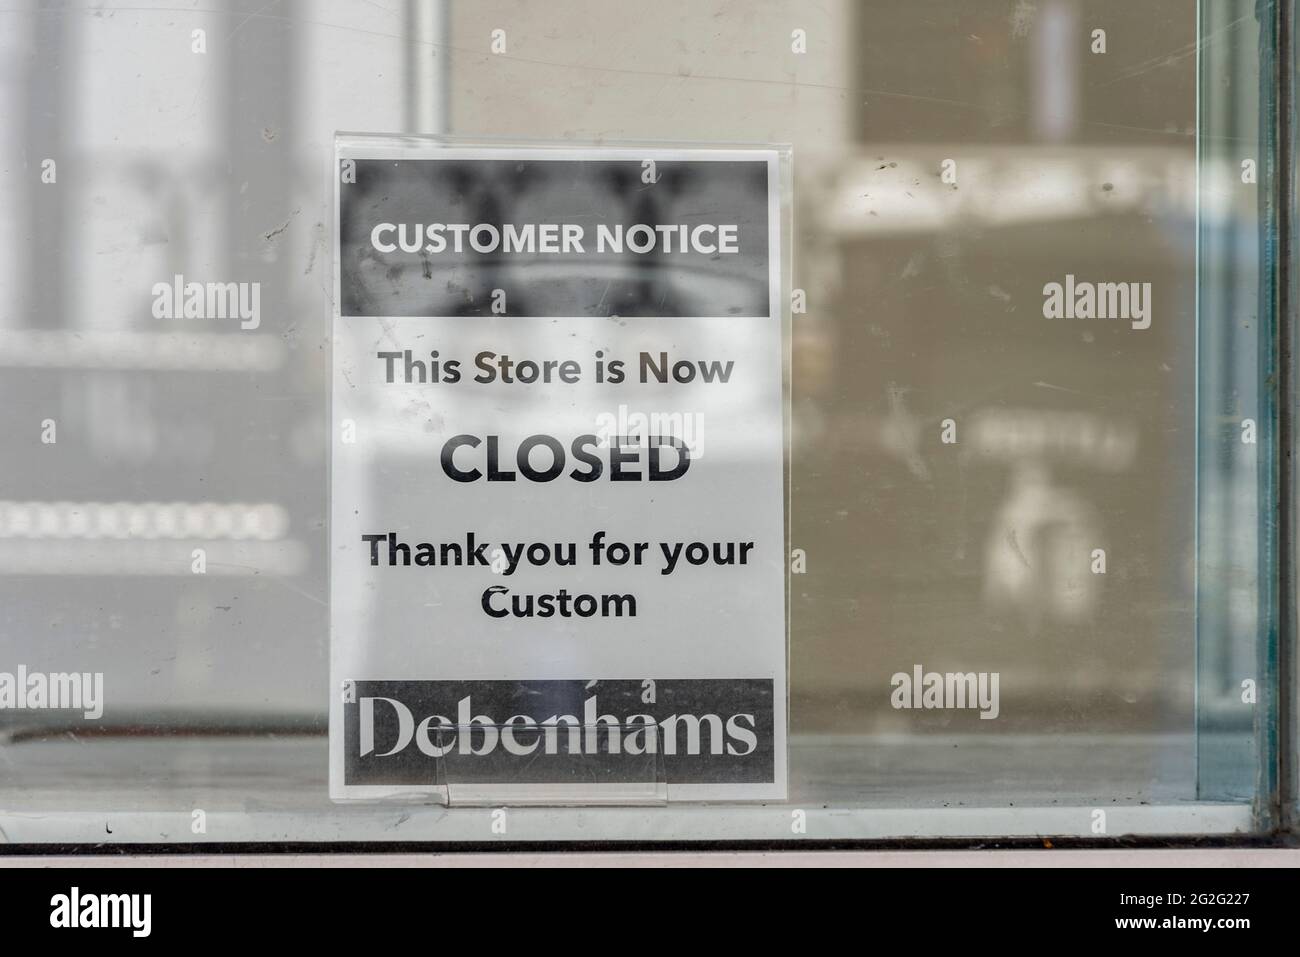 Closed sign in the window display of Debenhams in High Street, Southend on Sea, Essex, UK. Customer notice. This store is now closed, thank you custom Stock Photo